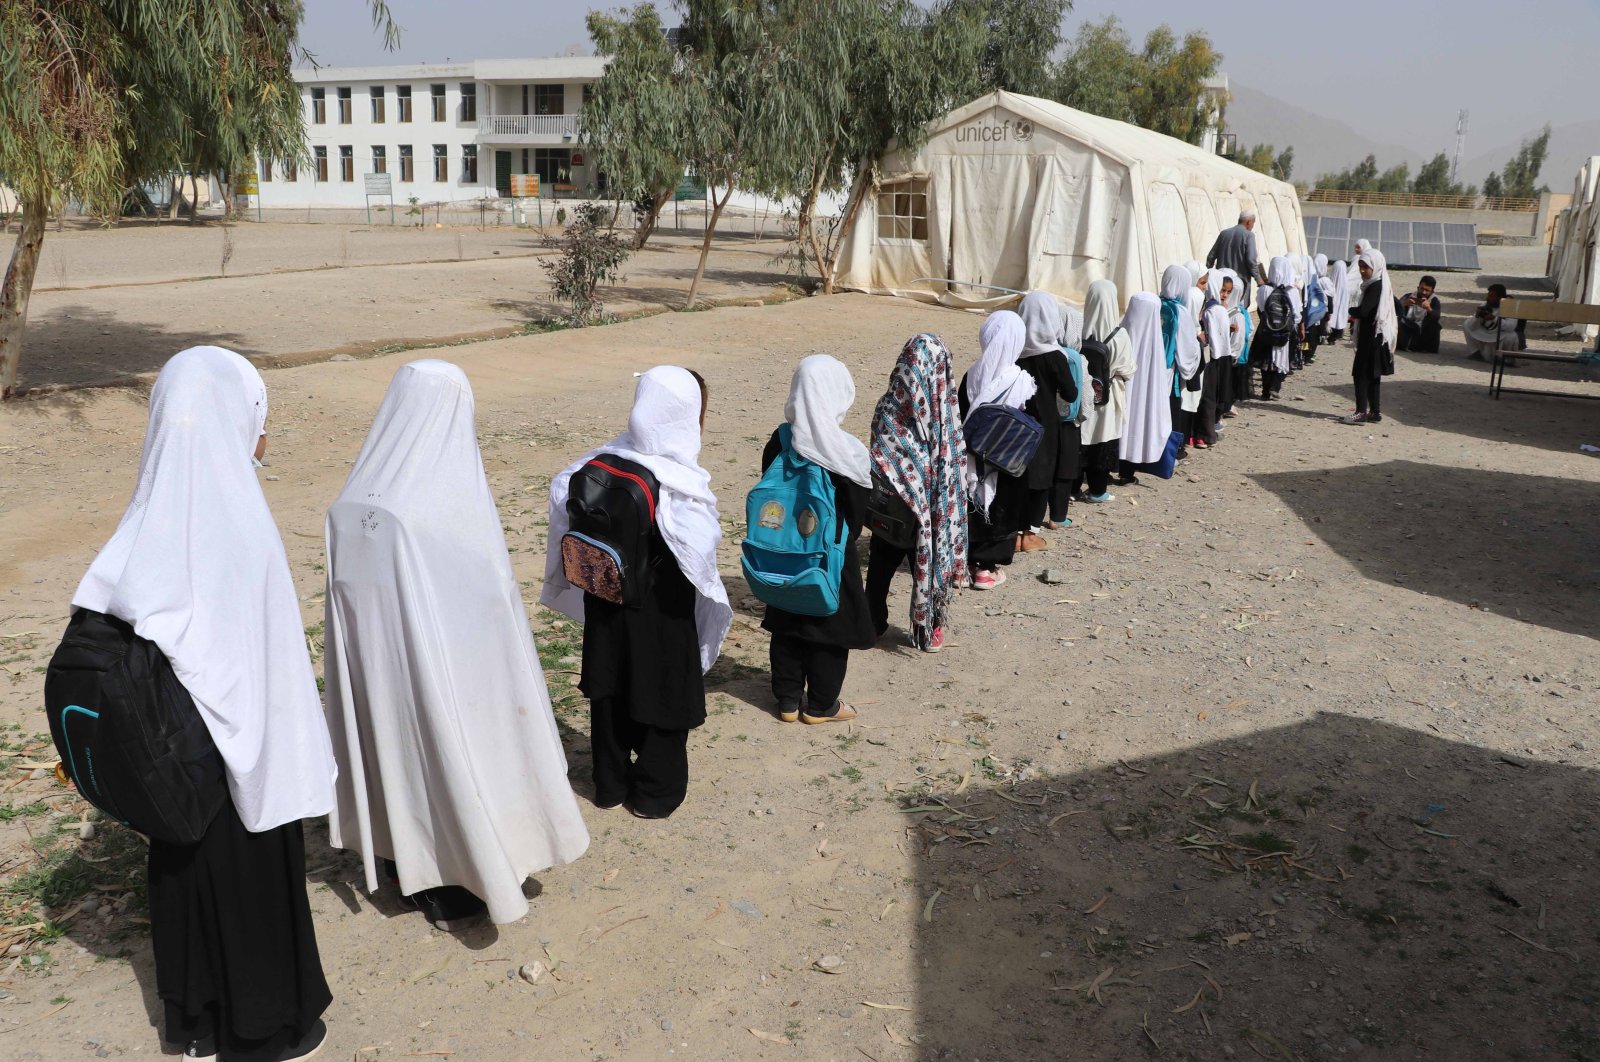 Afghan girls of up to primary grades line up at their school in Kandahar, Afghanistan, March 23, 2022.  (EPA Photo)